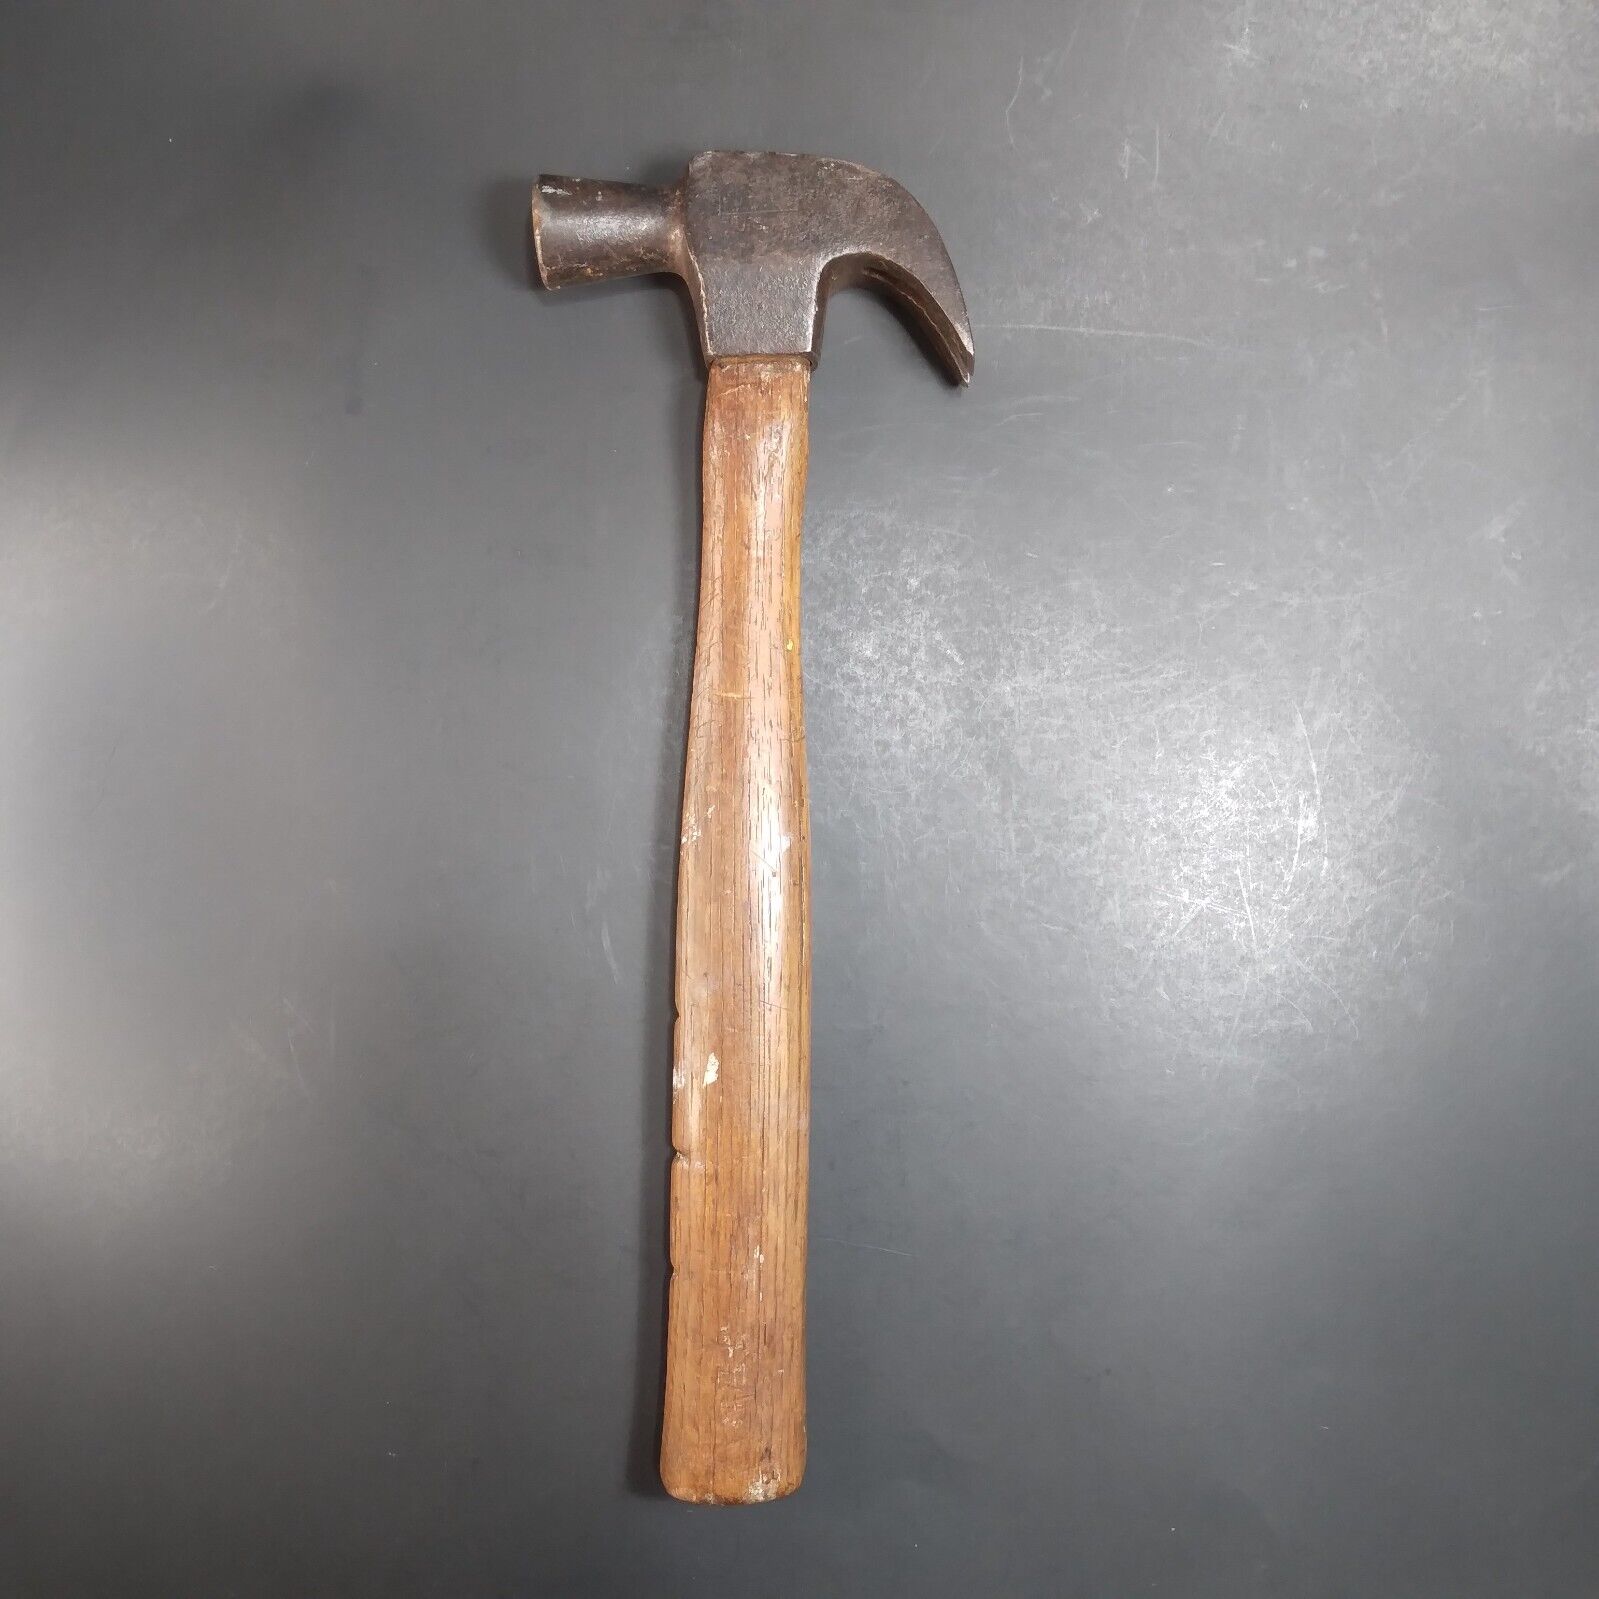 Vintage Antique U.S.A. Old Wood Handle Curved Claw Hammer Tapered Head